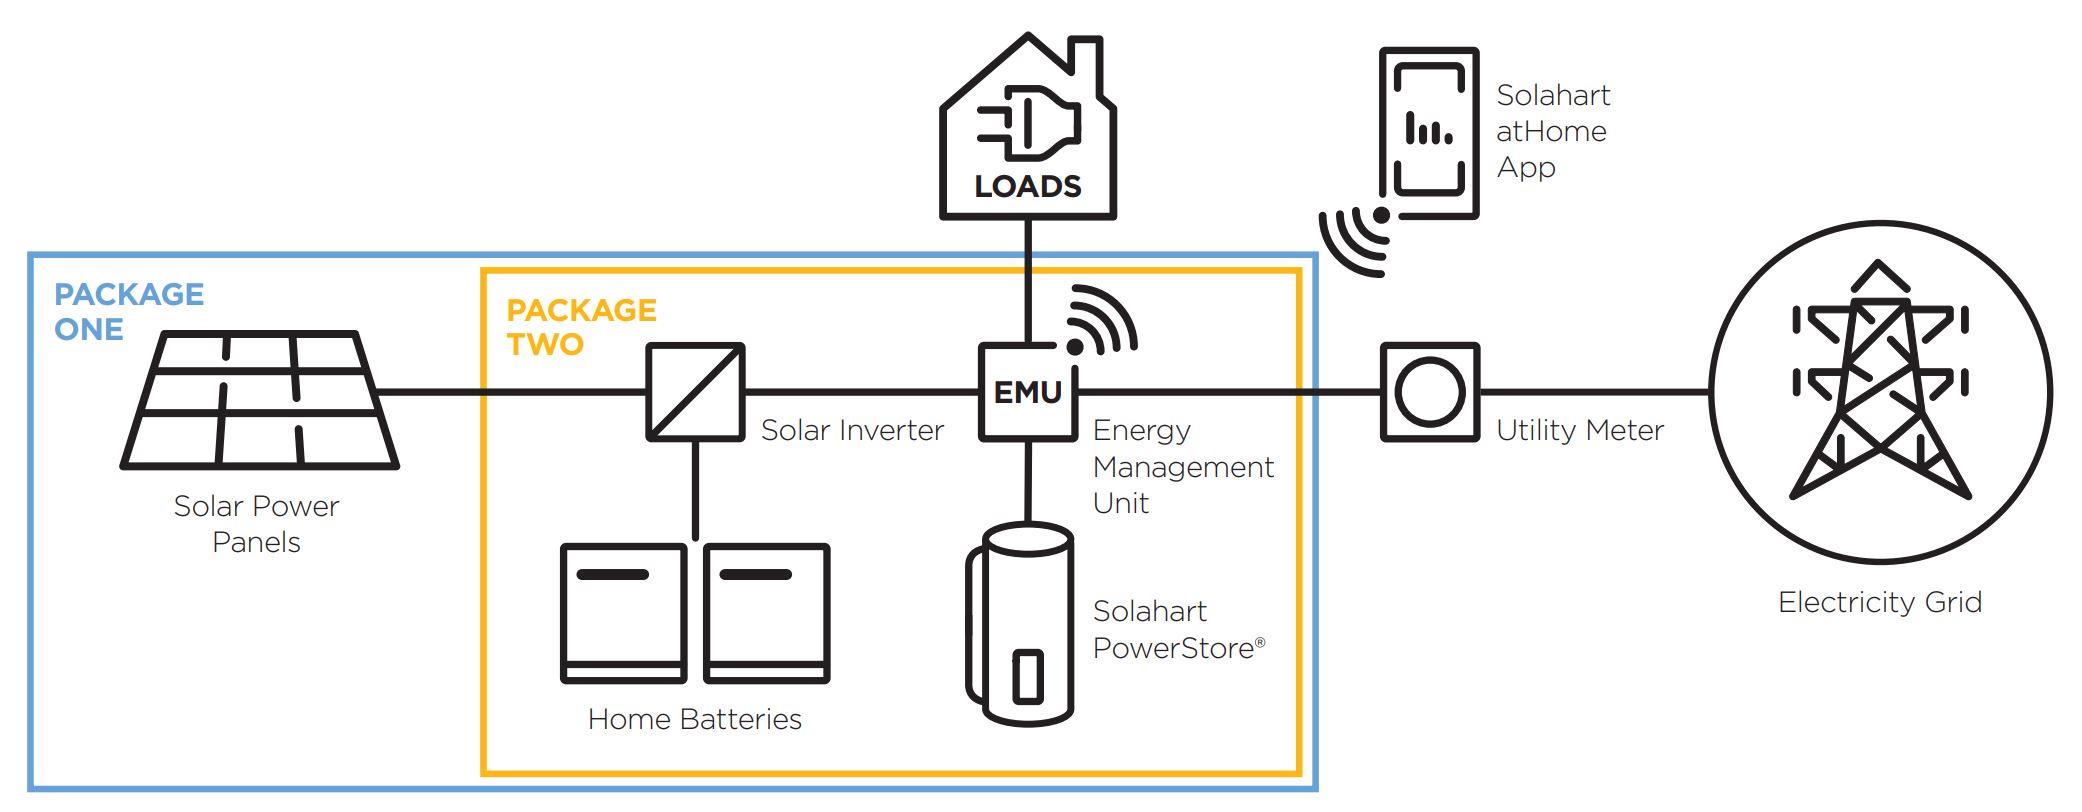 Infographic of how the Solahart PowerStore works.